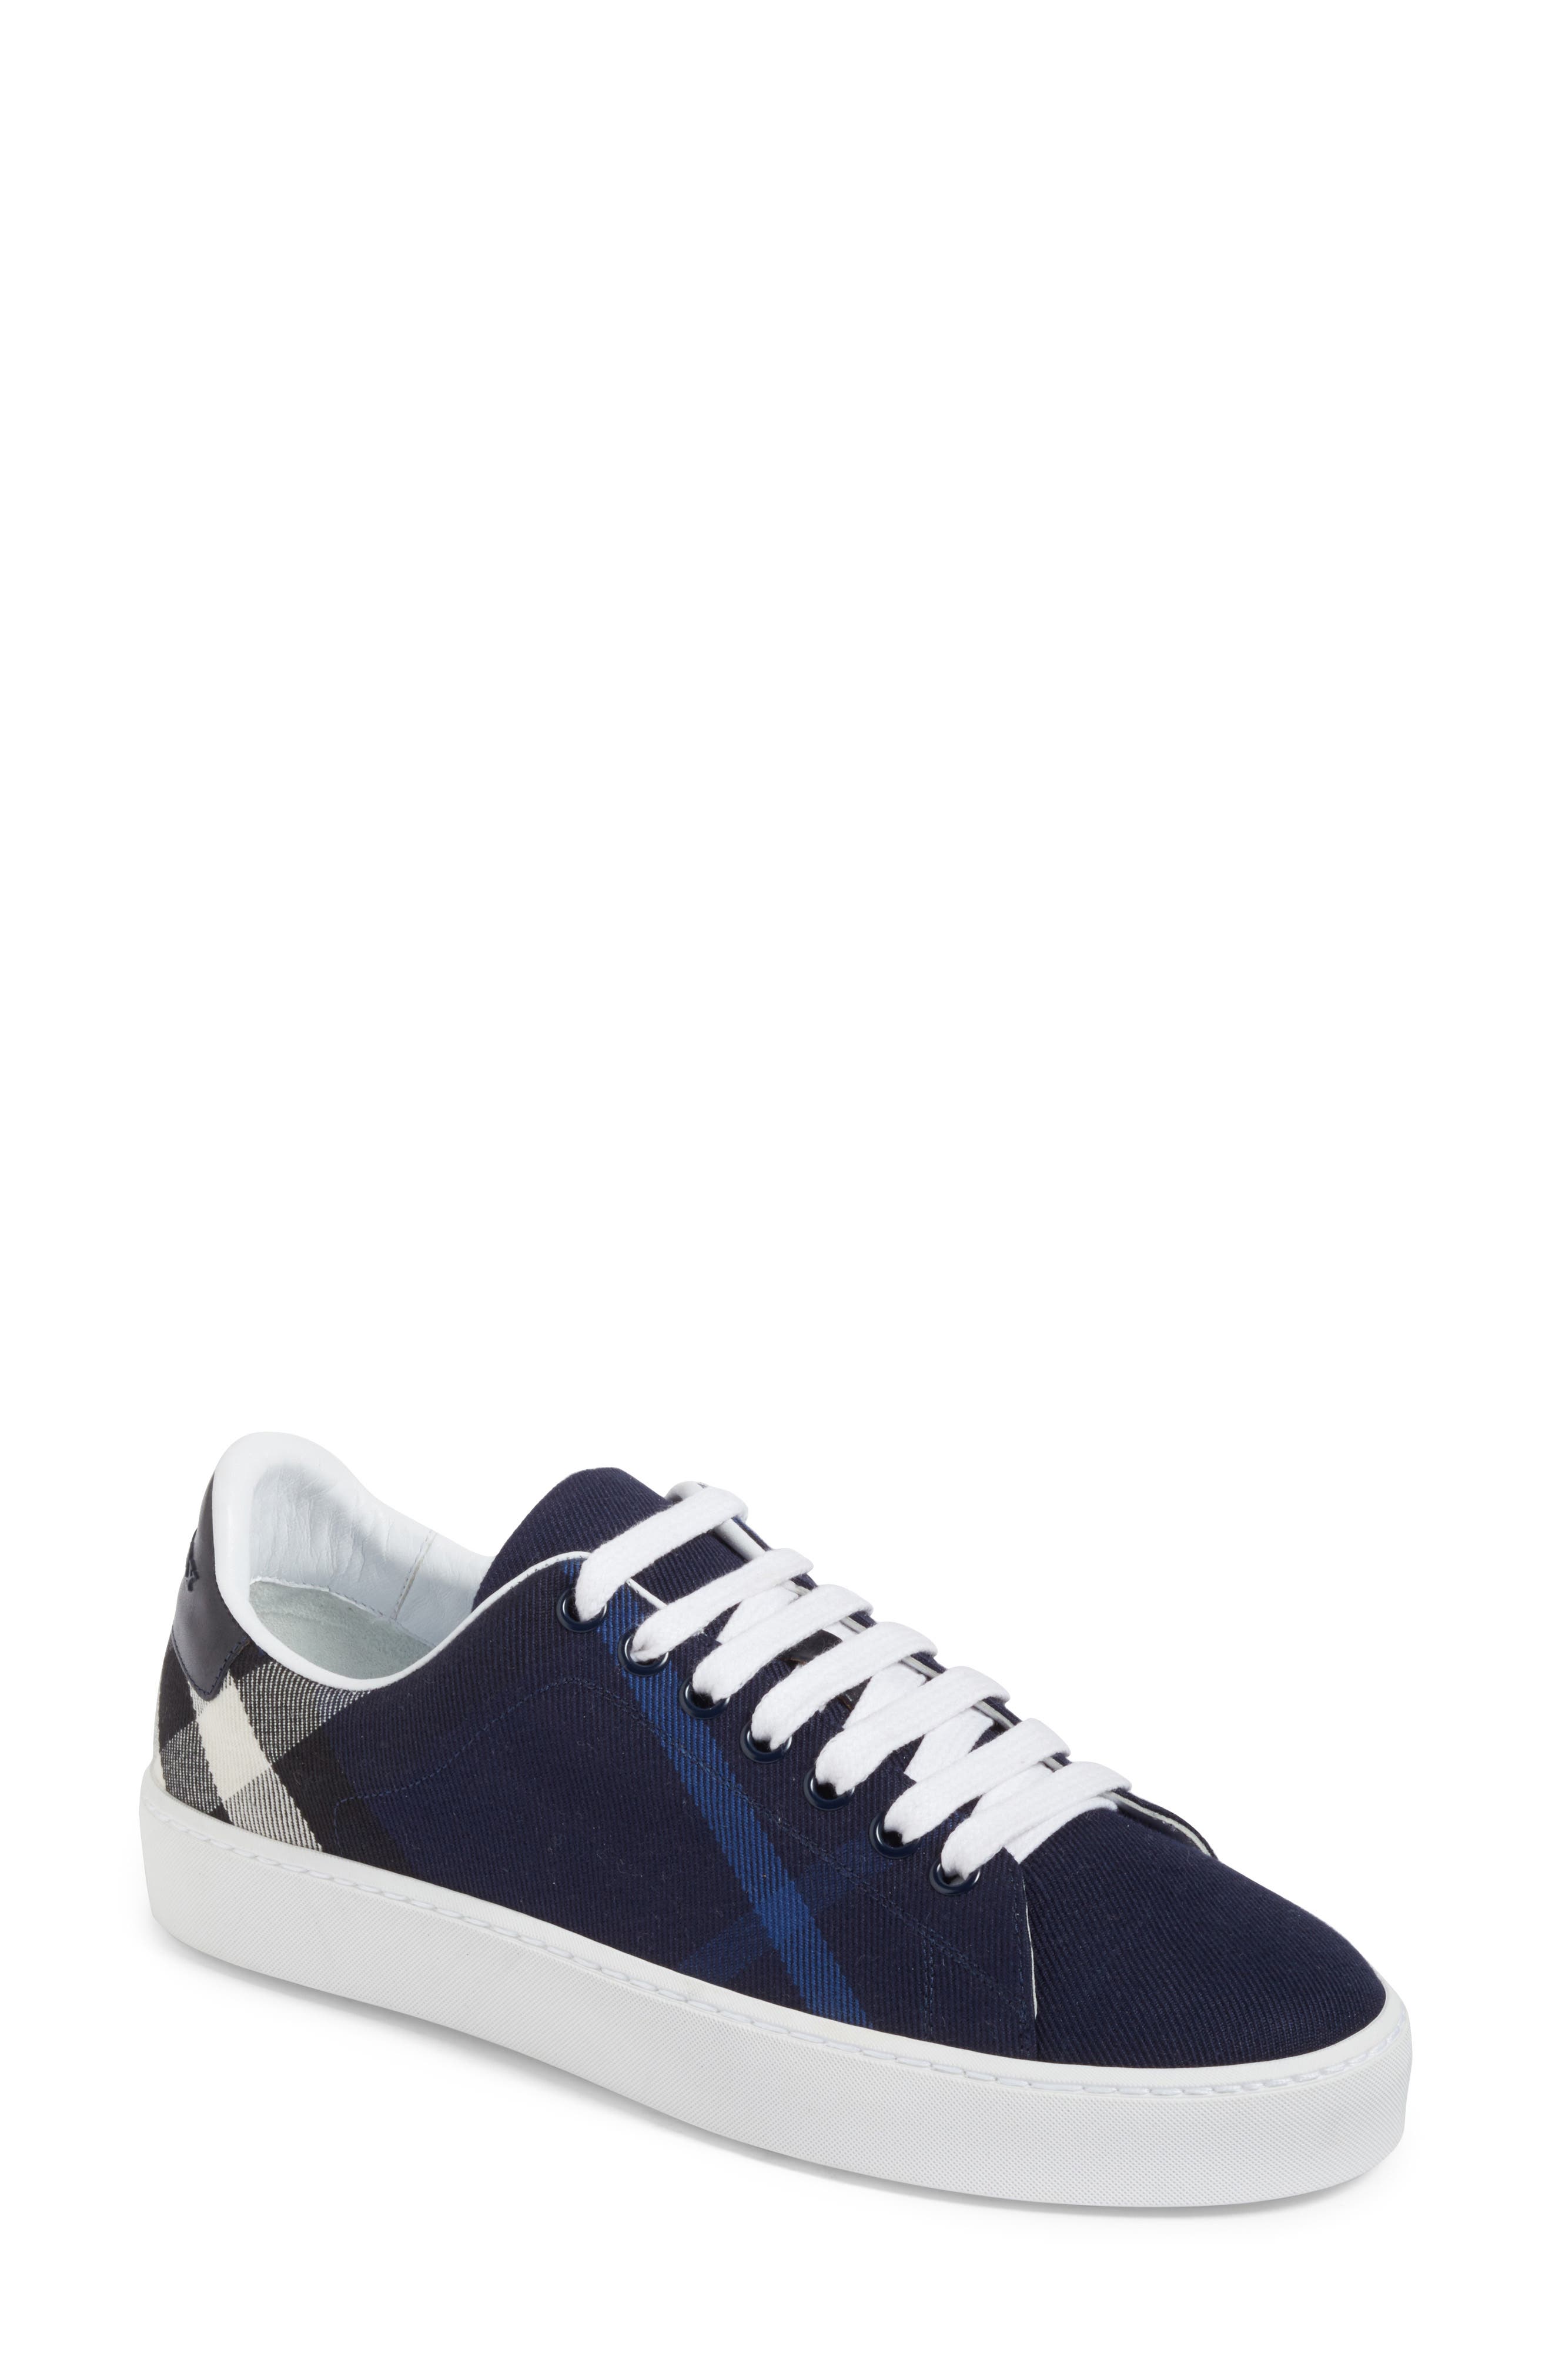 burberry women's check lace up sneakers